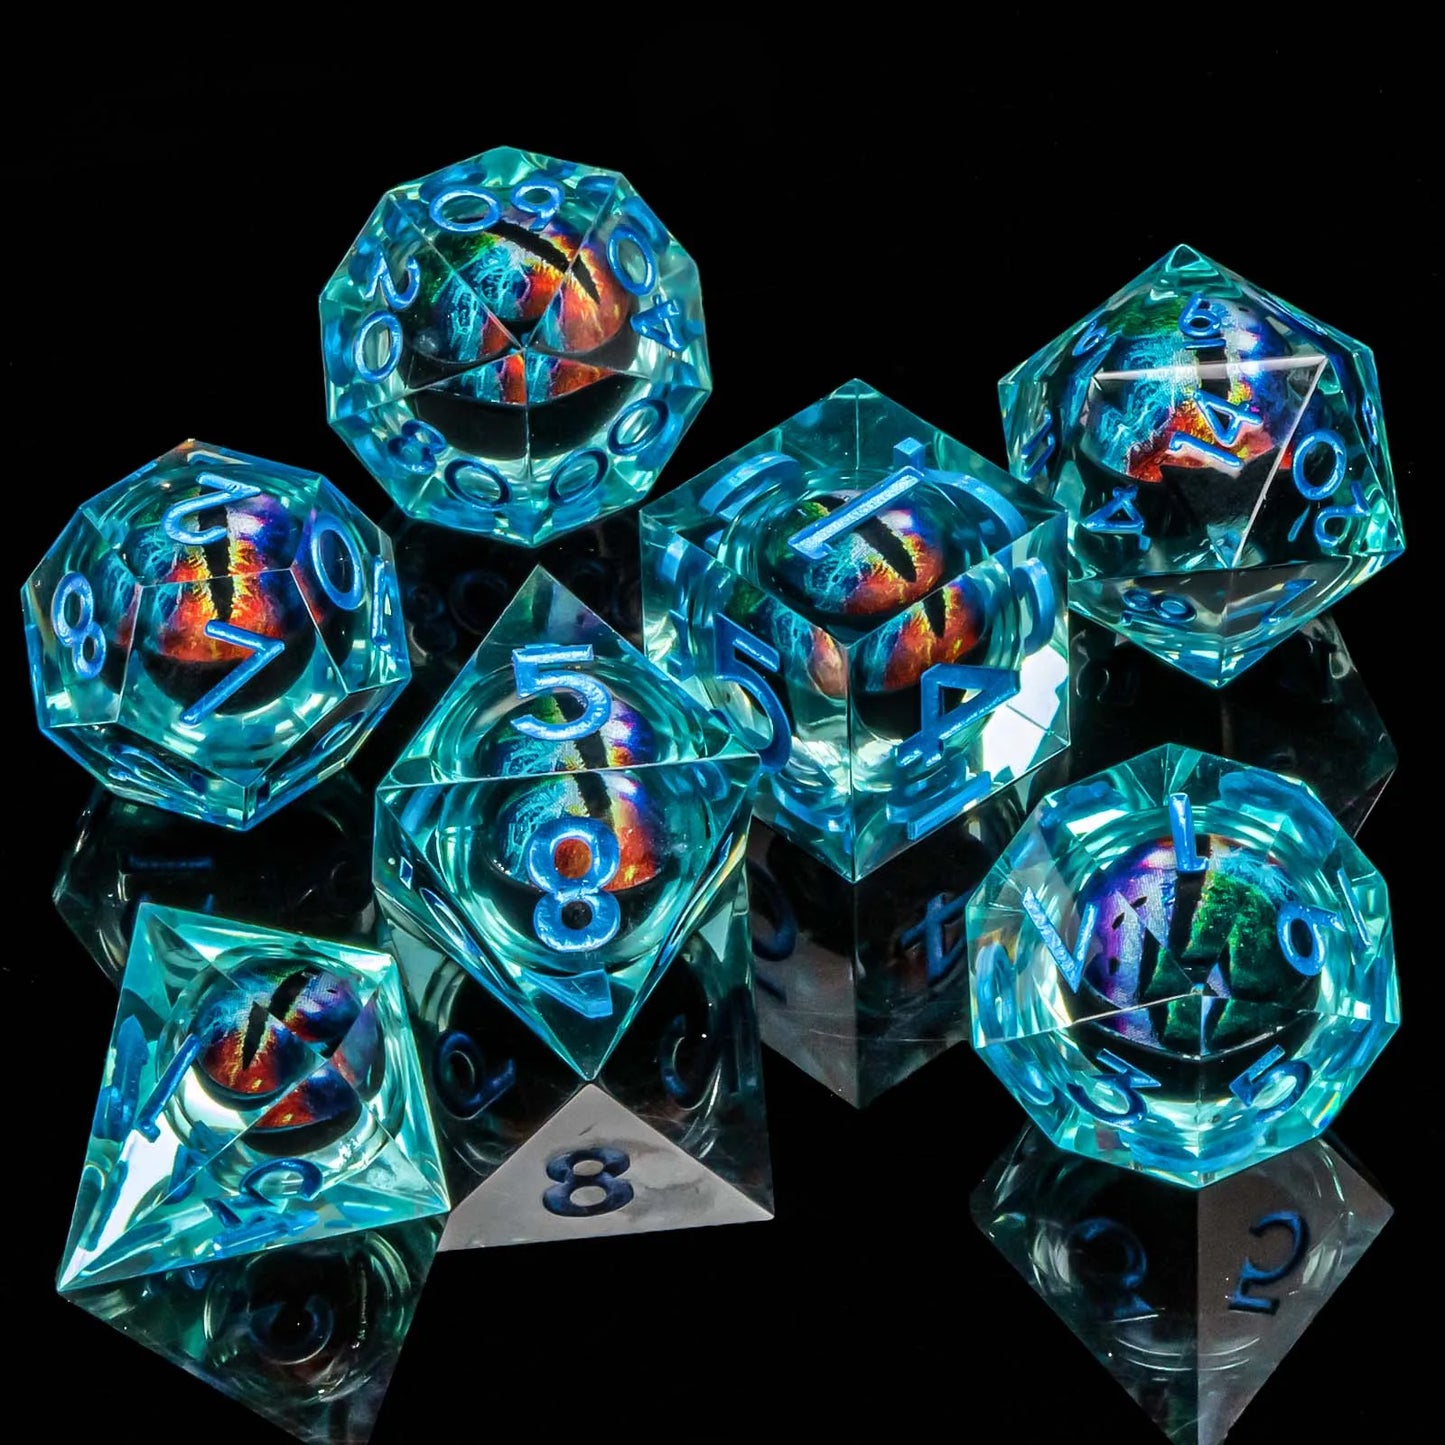 D and D Flowing Sand Sharp Edge Dragon Eye Dnd Resin RPG Polyhedral D&D Dice Set For Dungeon and Dragon Pathfinder Role Playing AZ18